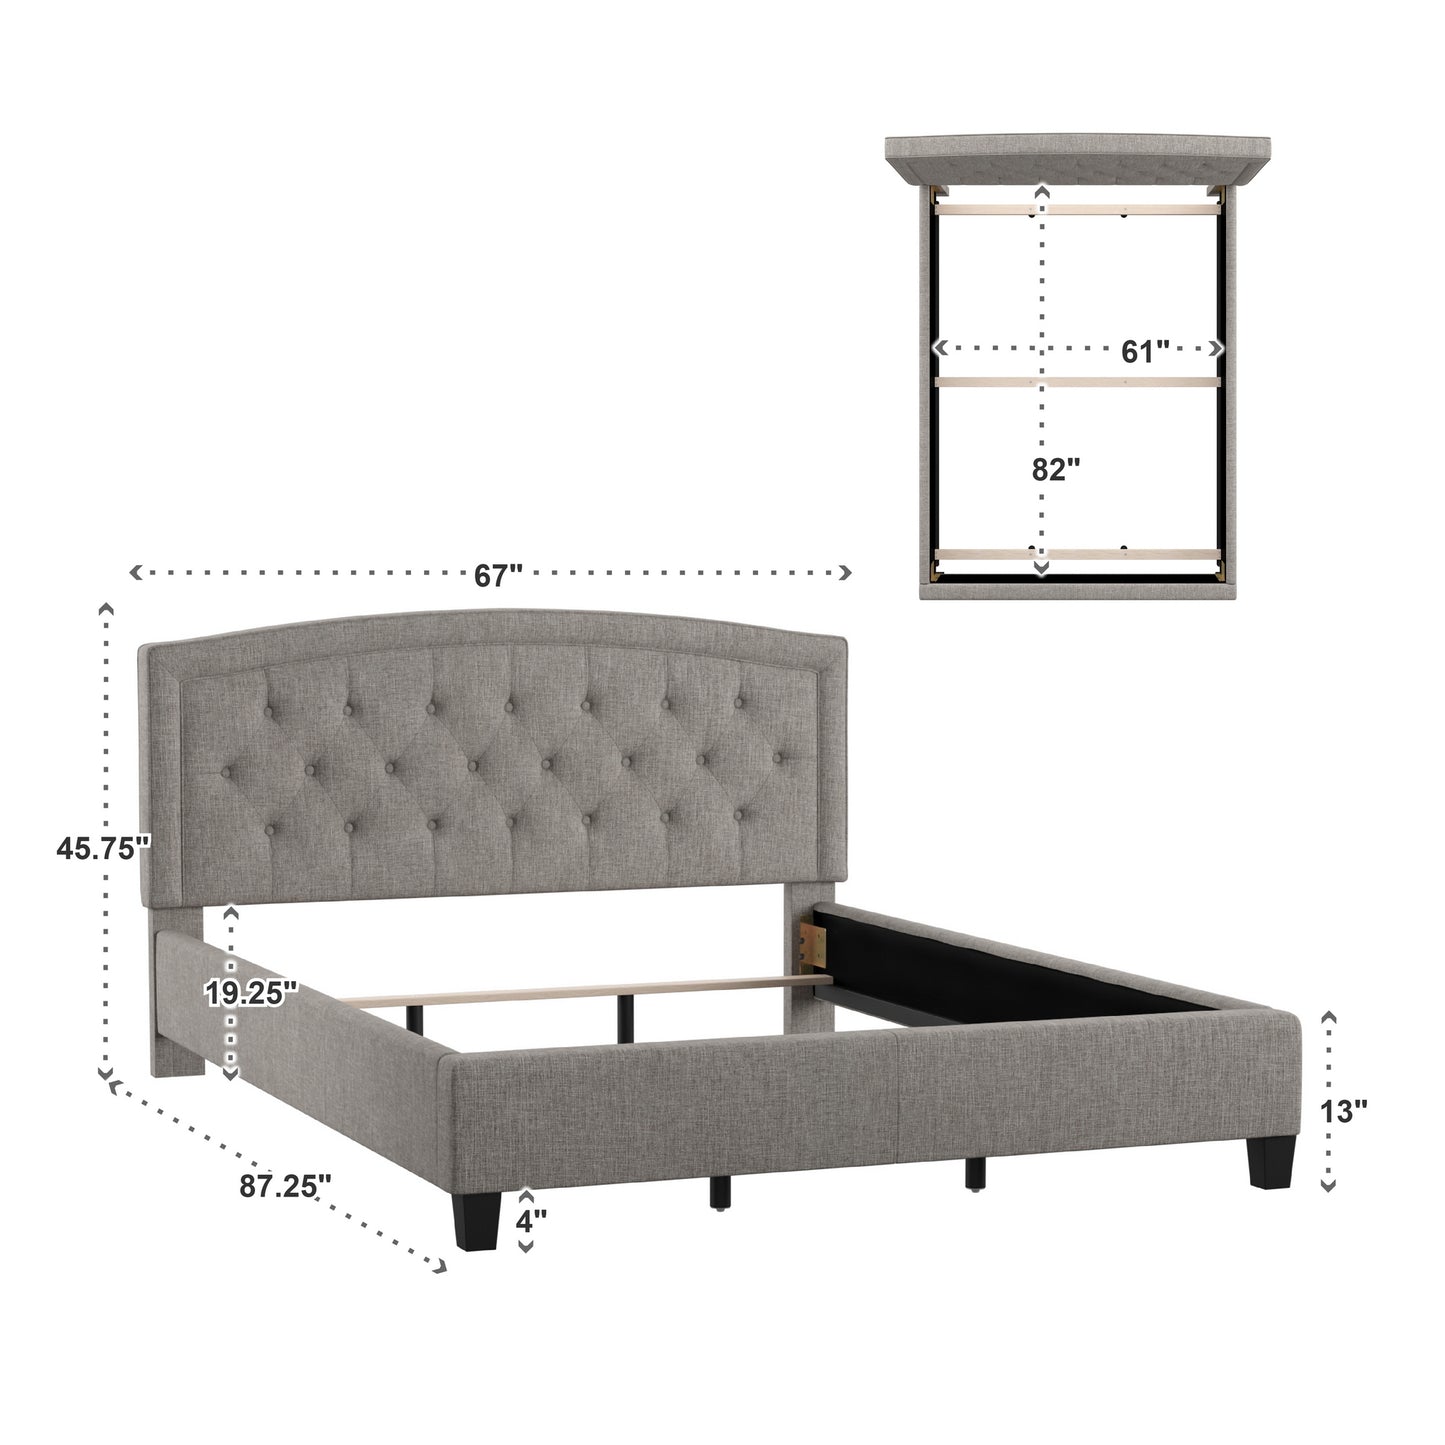 Adjustable Diamond-Tufted Arch-Back Bed - Grey, Queen